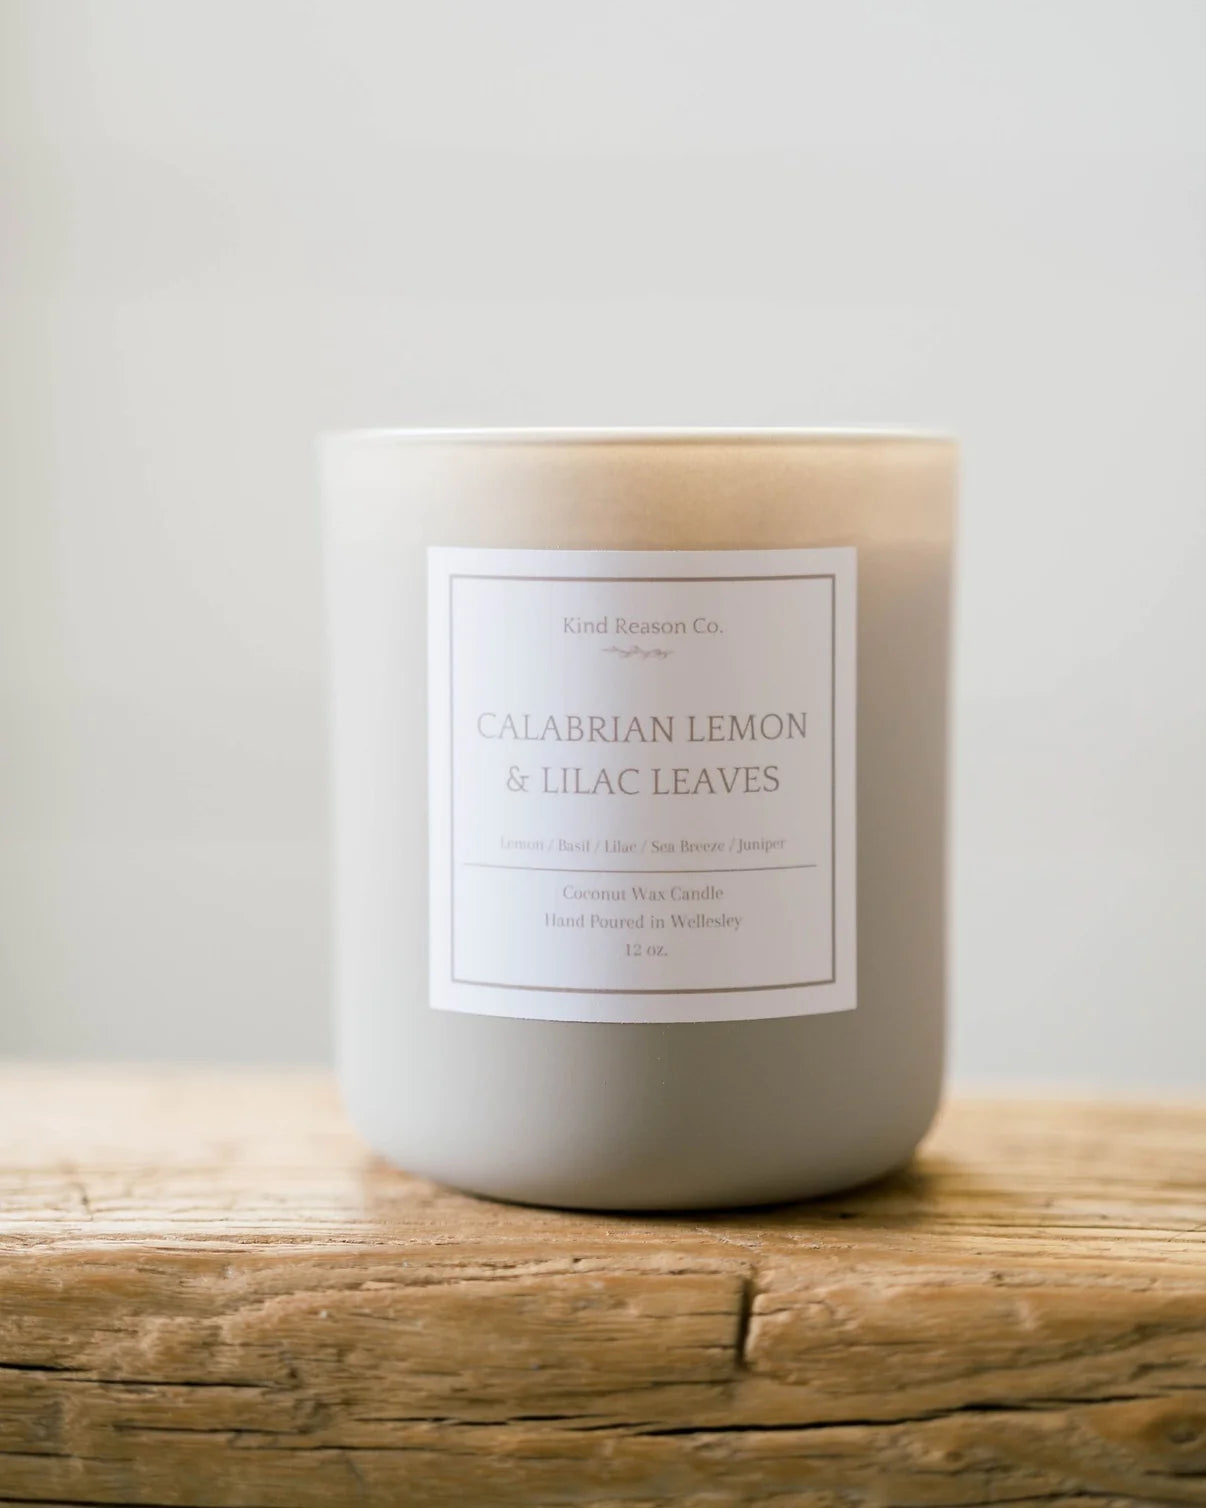 Calabrian Lemon & Lilac Leaves candle